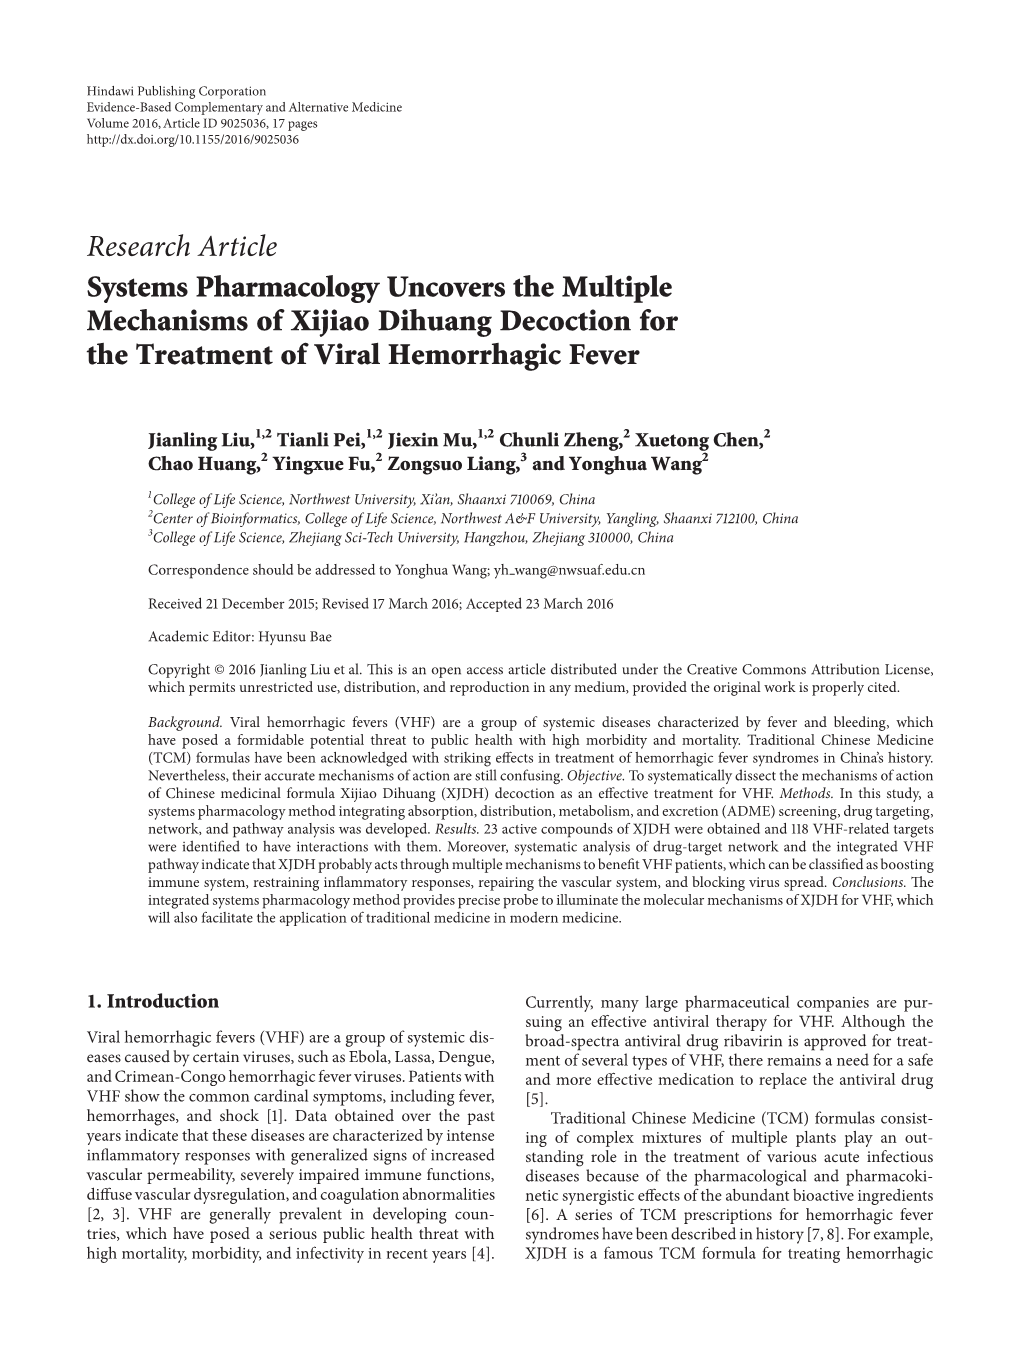 Systems Pharmacology Uncovers the Multiple Mechanisms of Xijiao Dihuang Decoction for the Treatment of Viral Hemorrhagic Fever